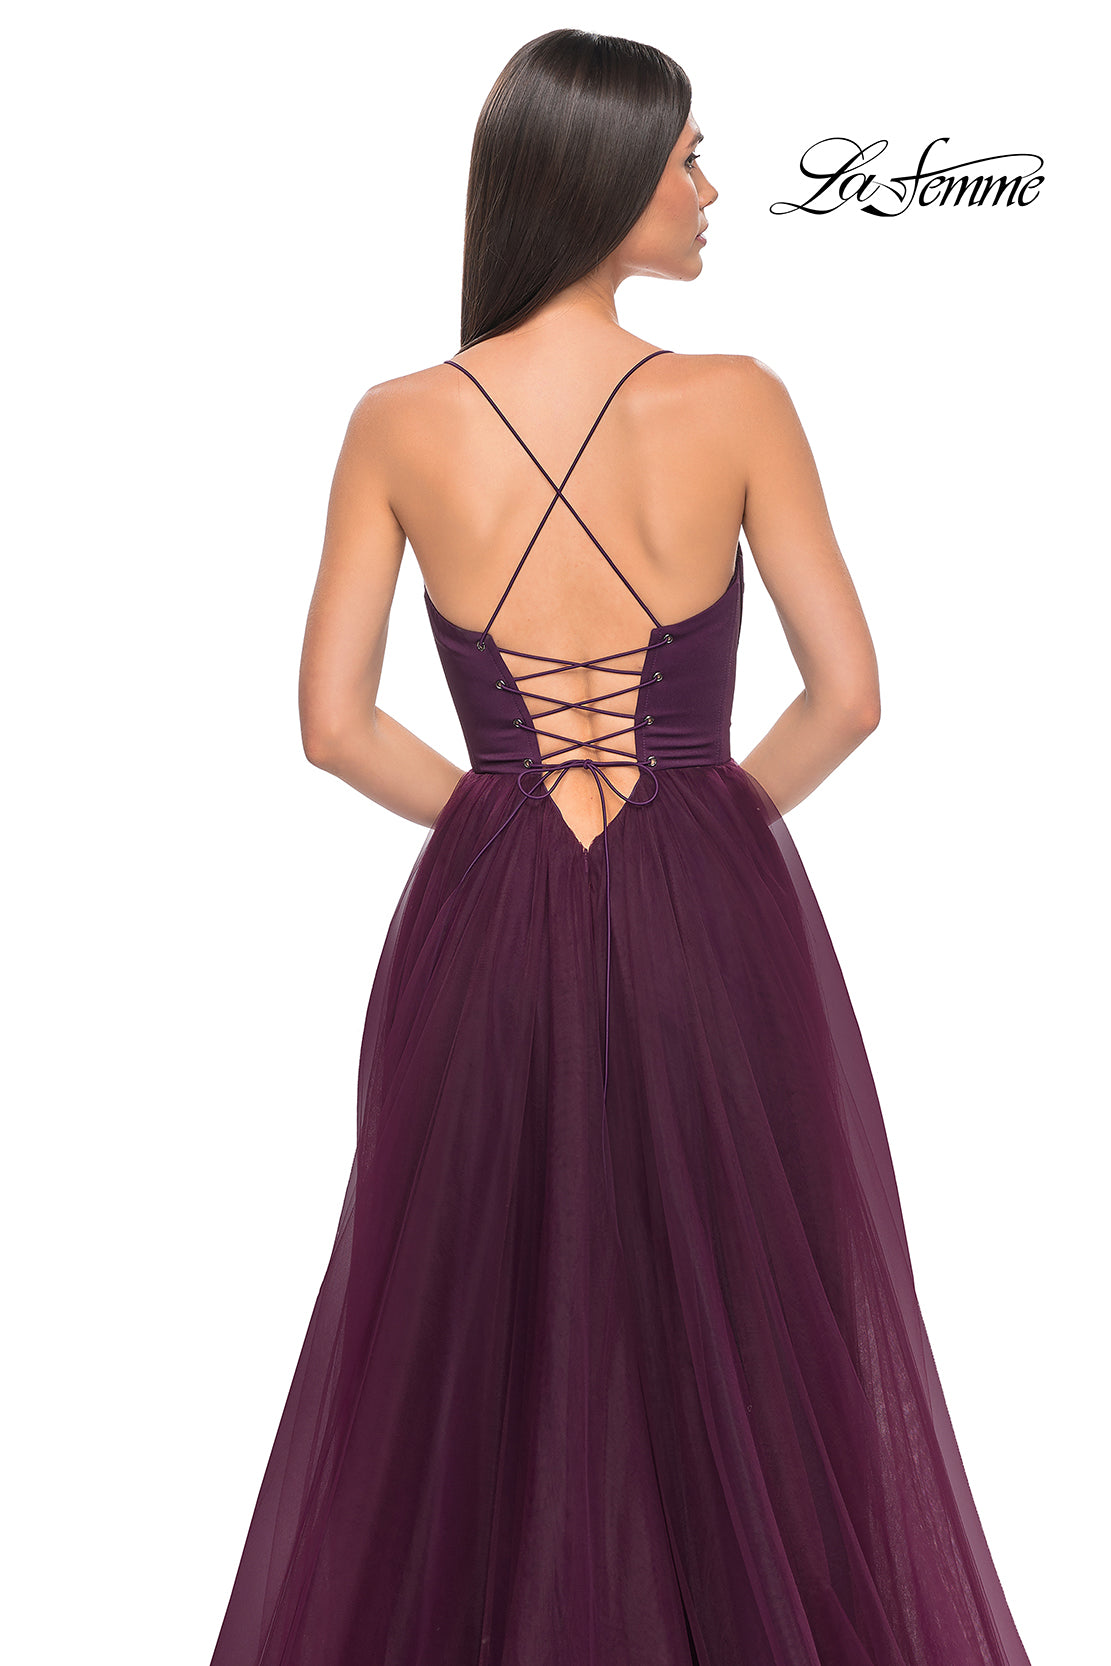 La-Femme-32065-Sweetheart-Neckline-Lace-up-Back-High-Slit-Jersey-Tulle-A-Line-Dark-Berry-Evening-Dress-B-Chic-Fashions-Prom-Dress